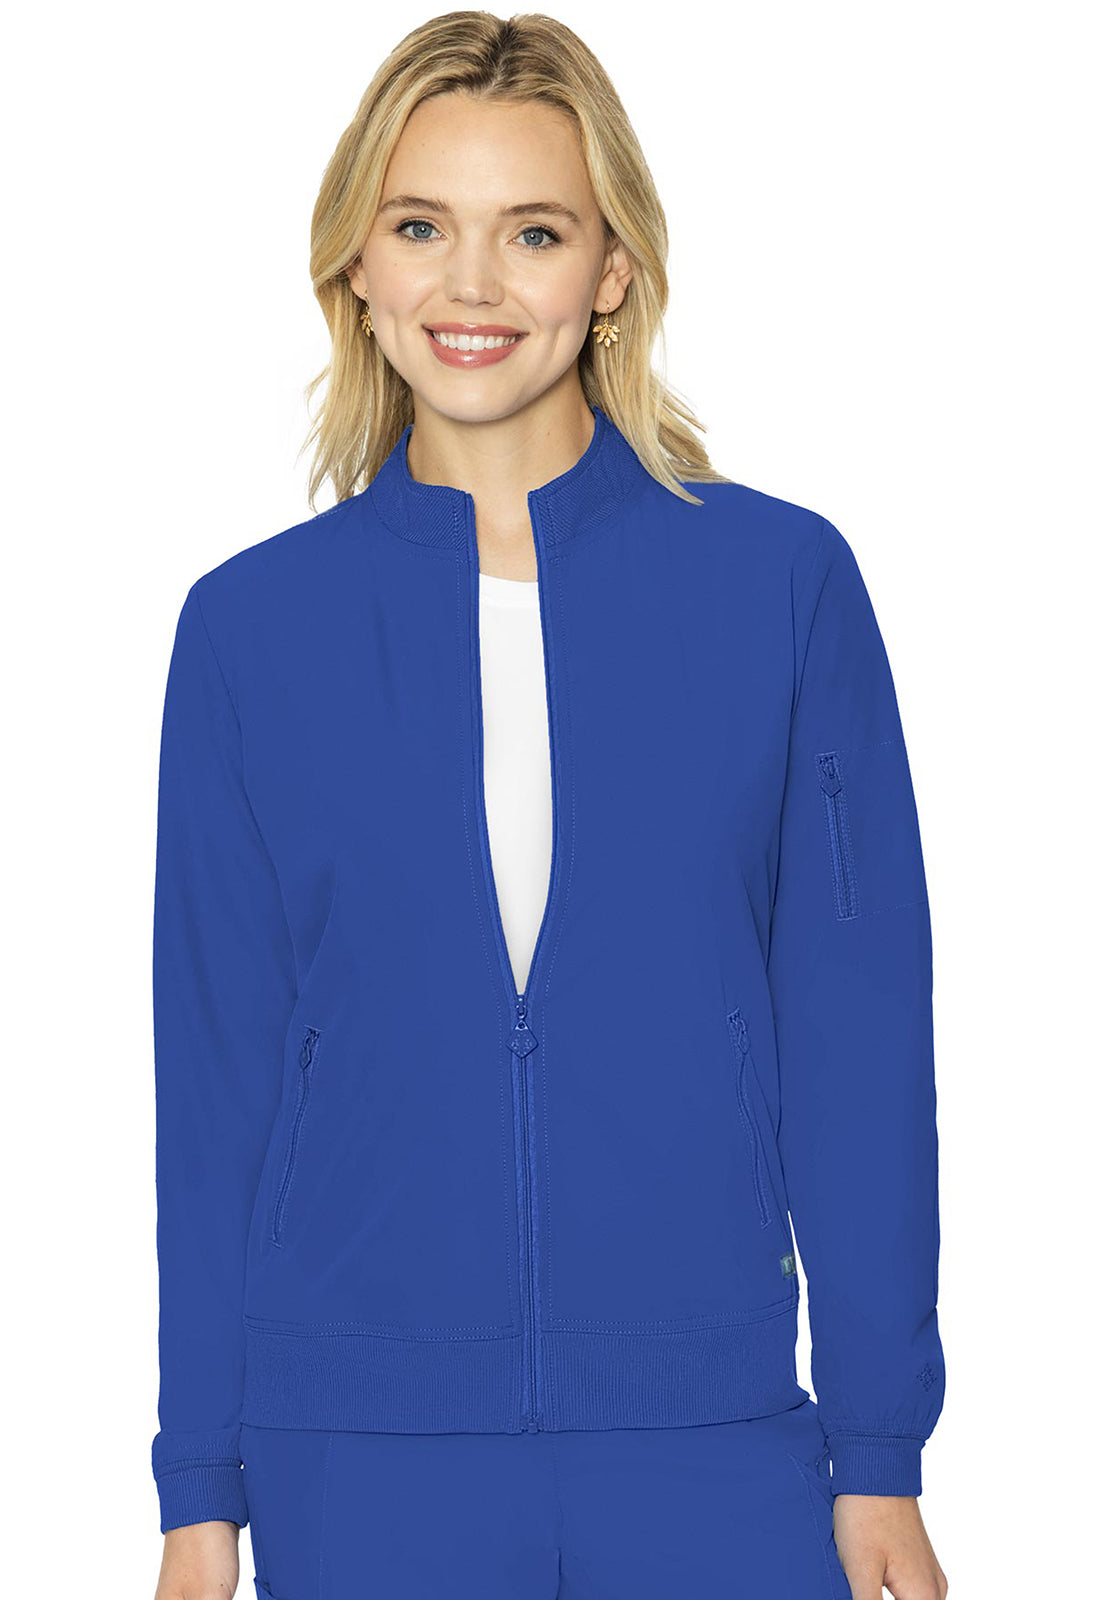 Clearance Med Couture Peaches Warm-Up Jacket